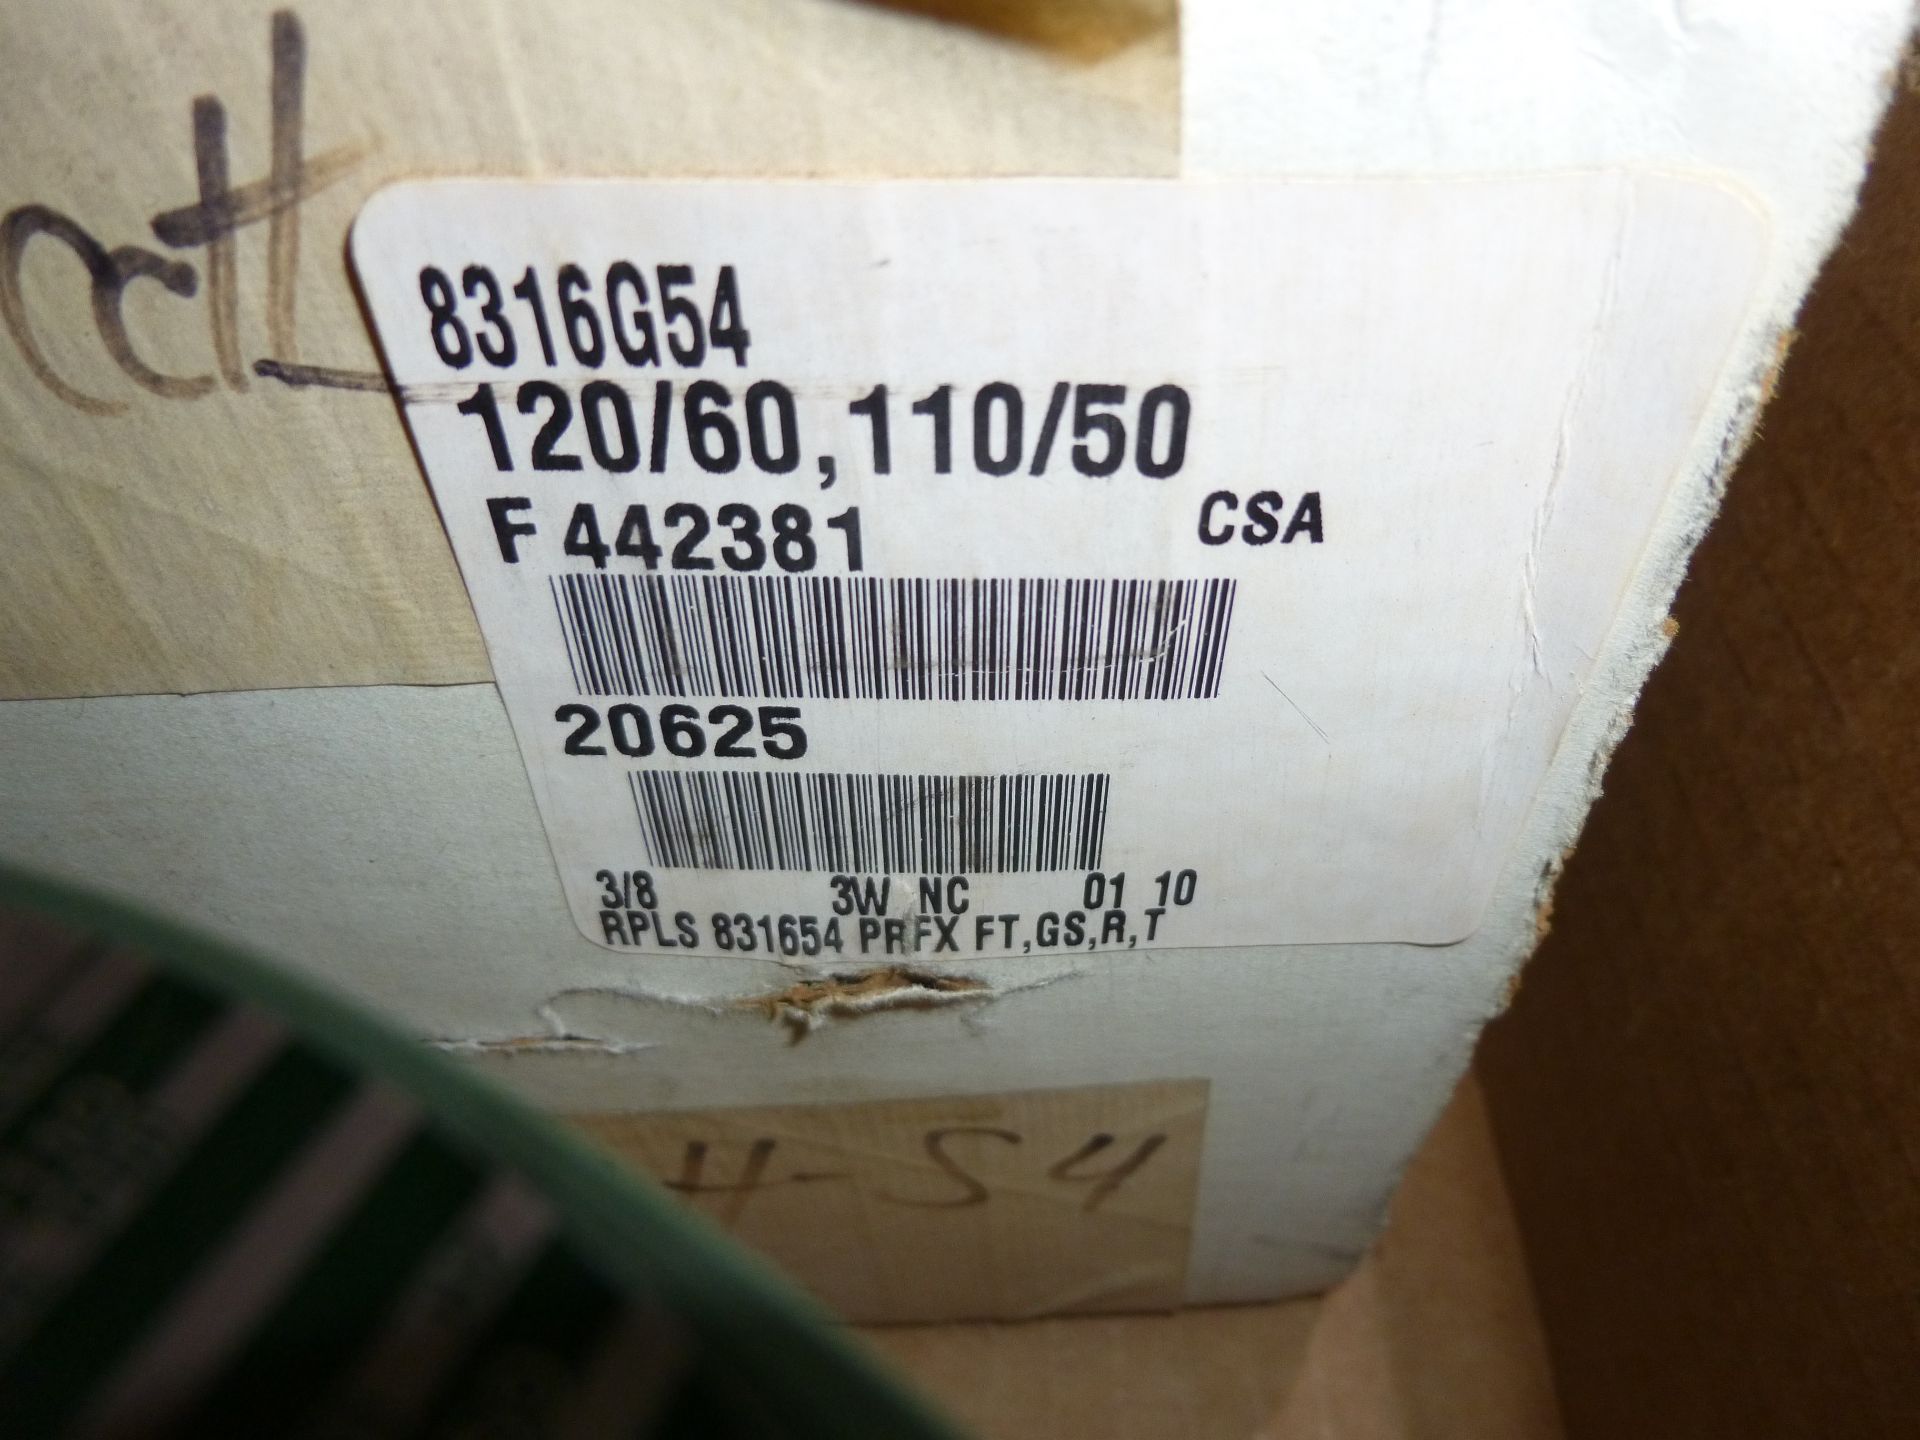 Asco valve model 8316g54, new in box as pictured, as always with Brolyn LLC auctions, all lots can - Image 2 of 2